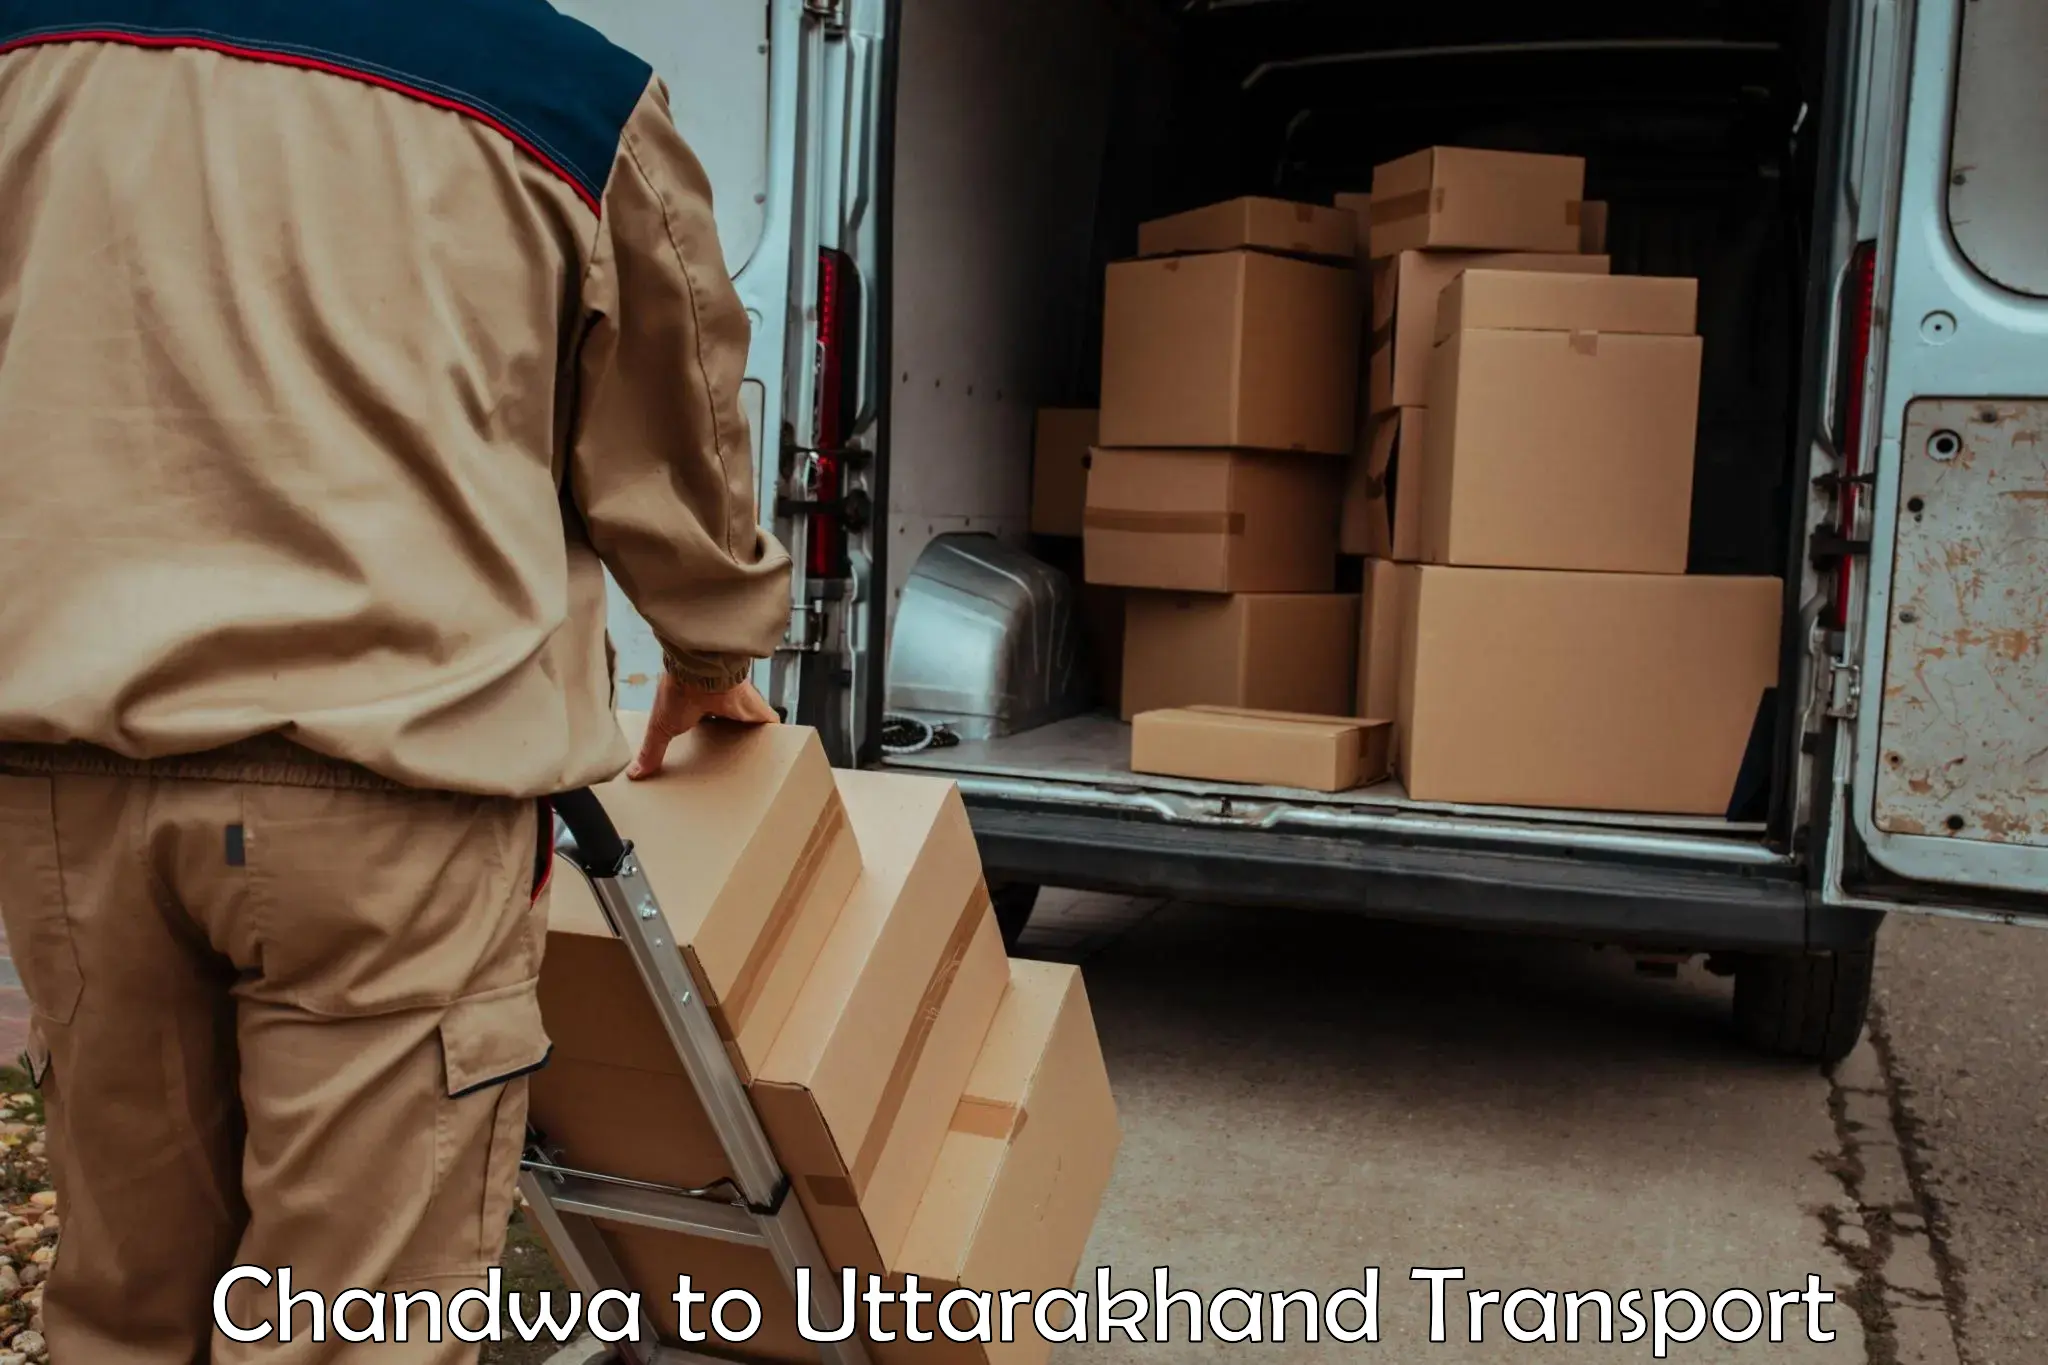 Air freight transport services Chandwa to Dwarahat